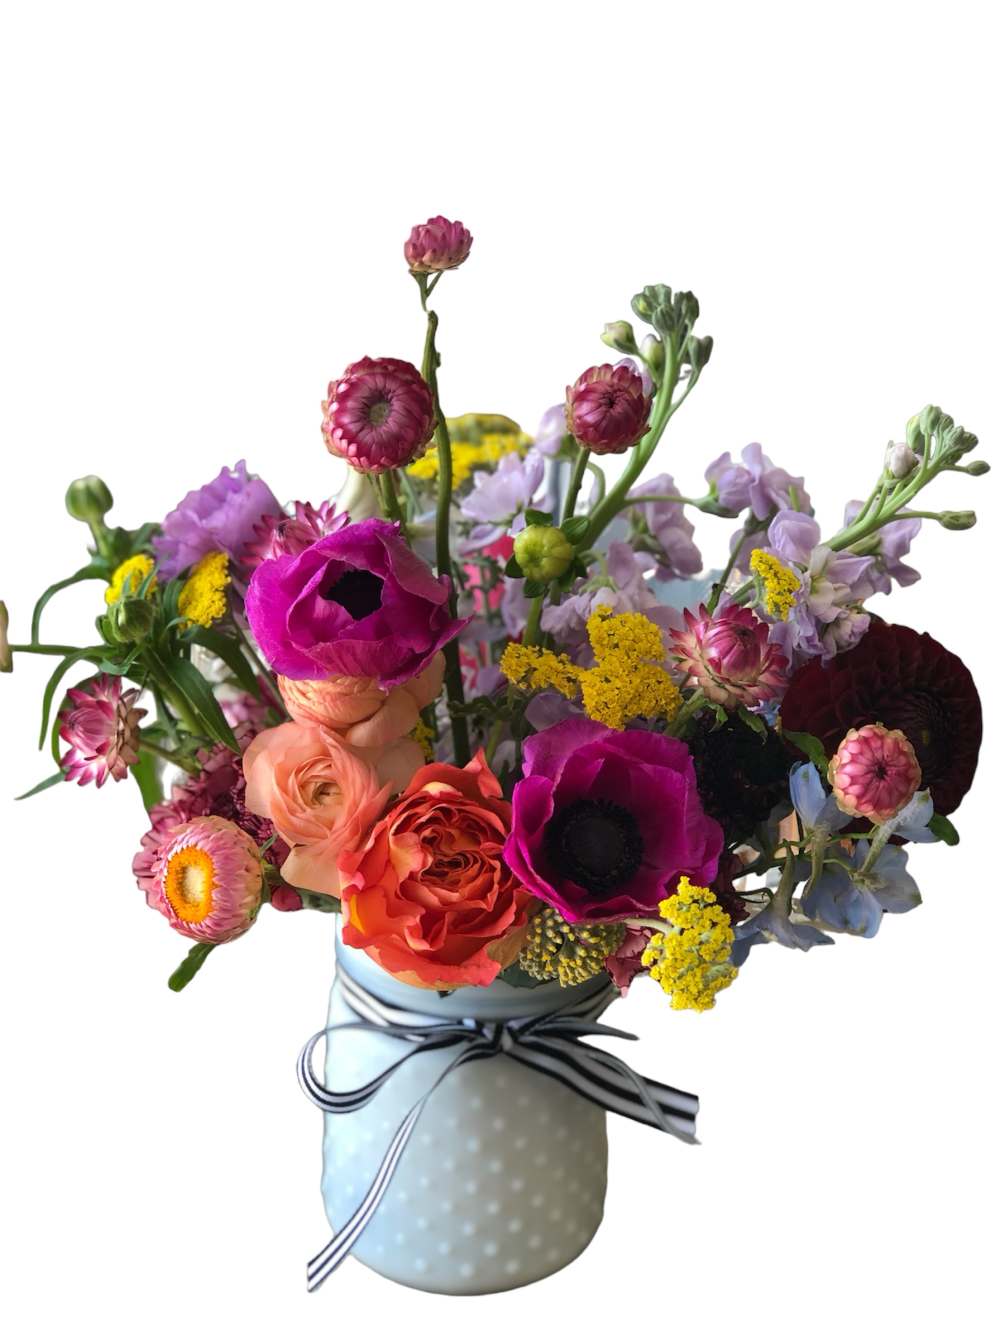 Circus mix of colors and flowers to shower the ones you love